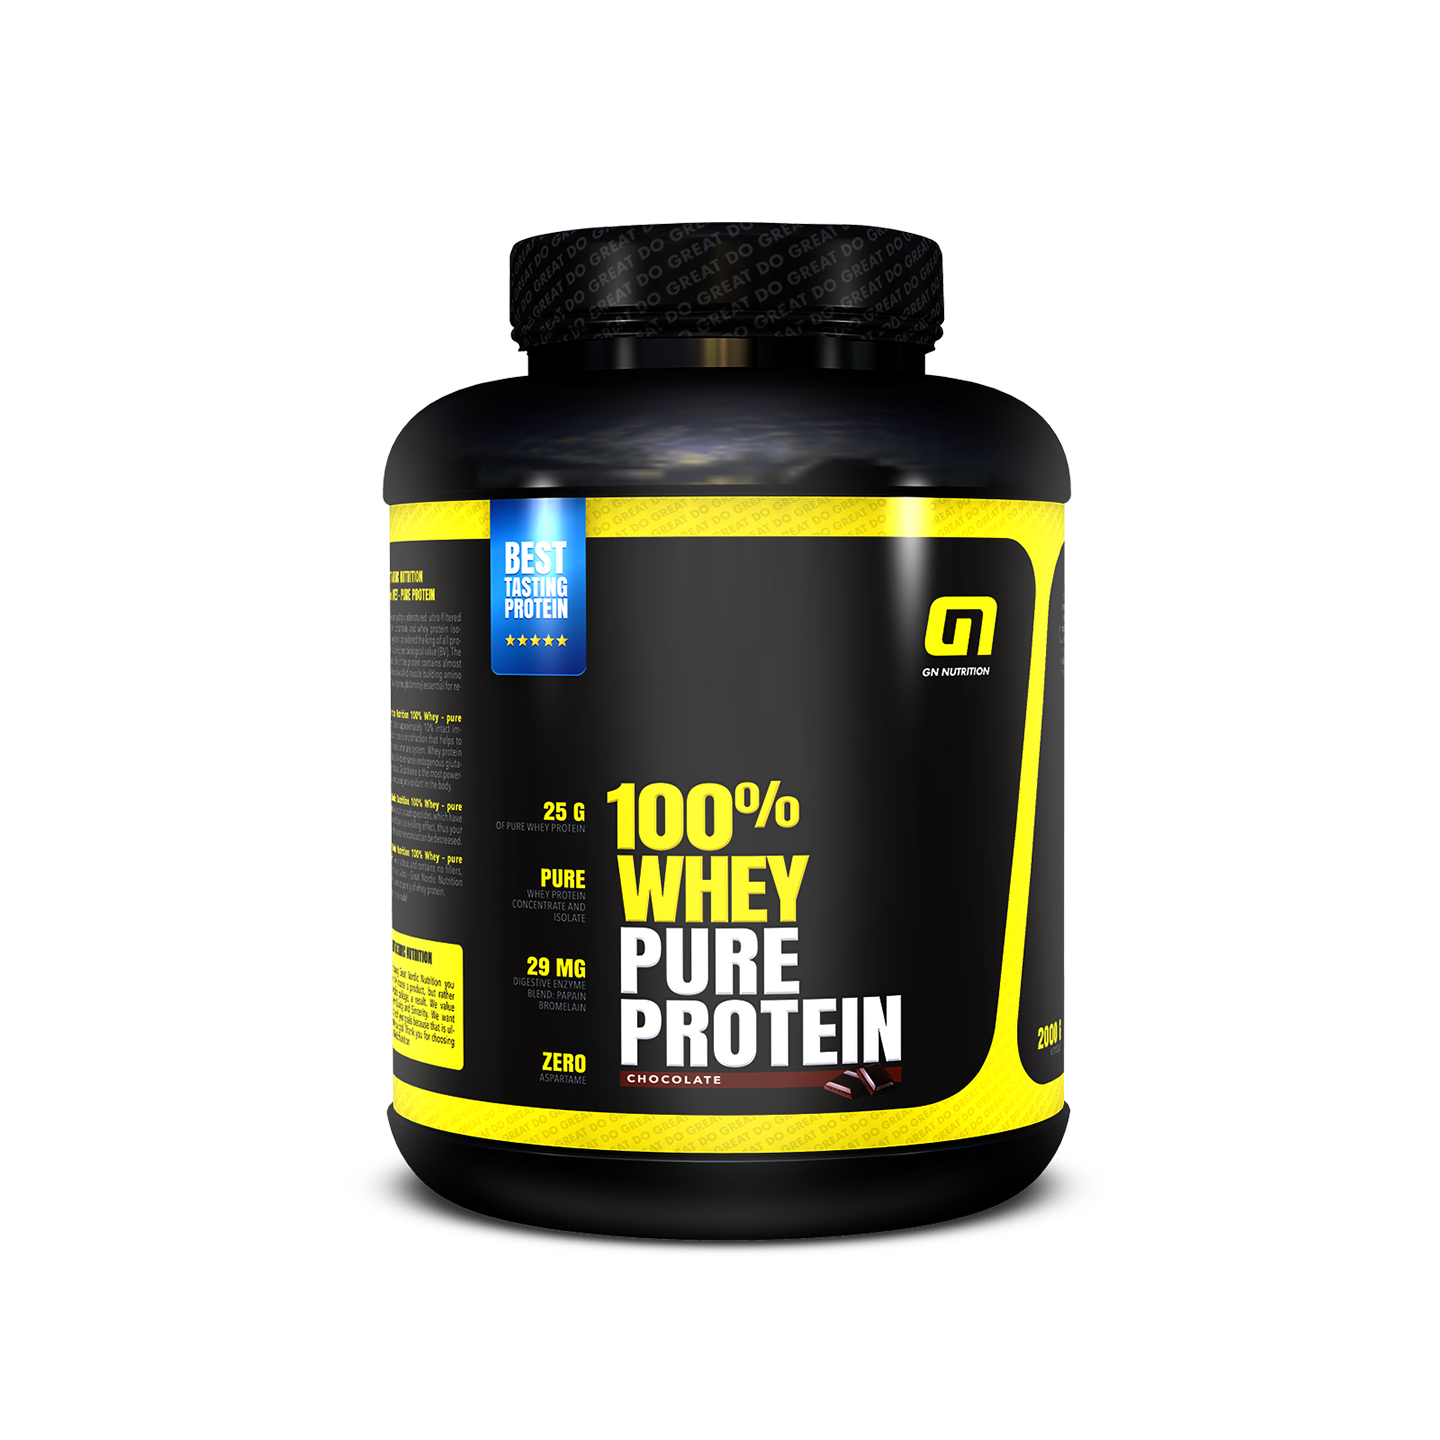 Pure Protein Whey. Whey Protein оригинал. Go Whey Protein. Whey Protein Германия. Чистый протеин